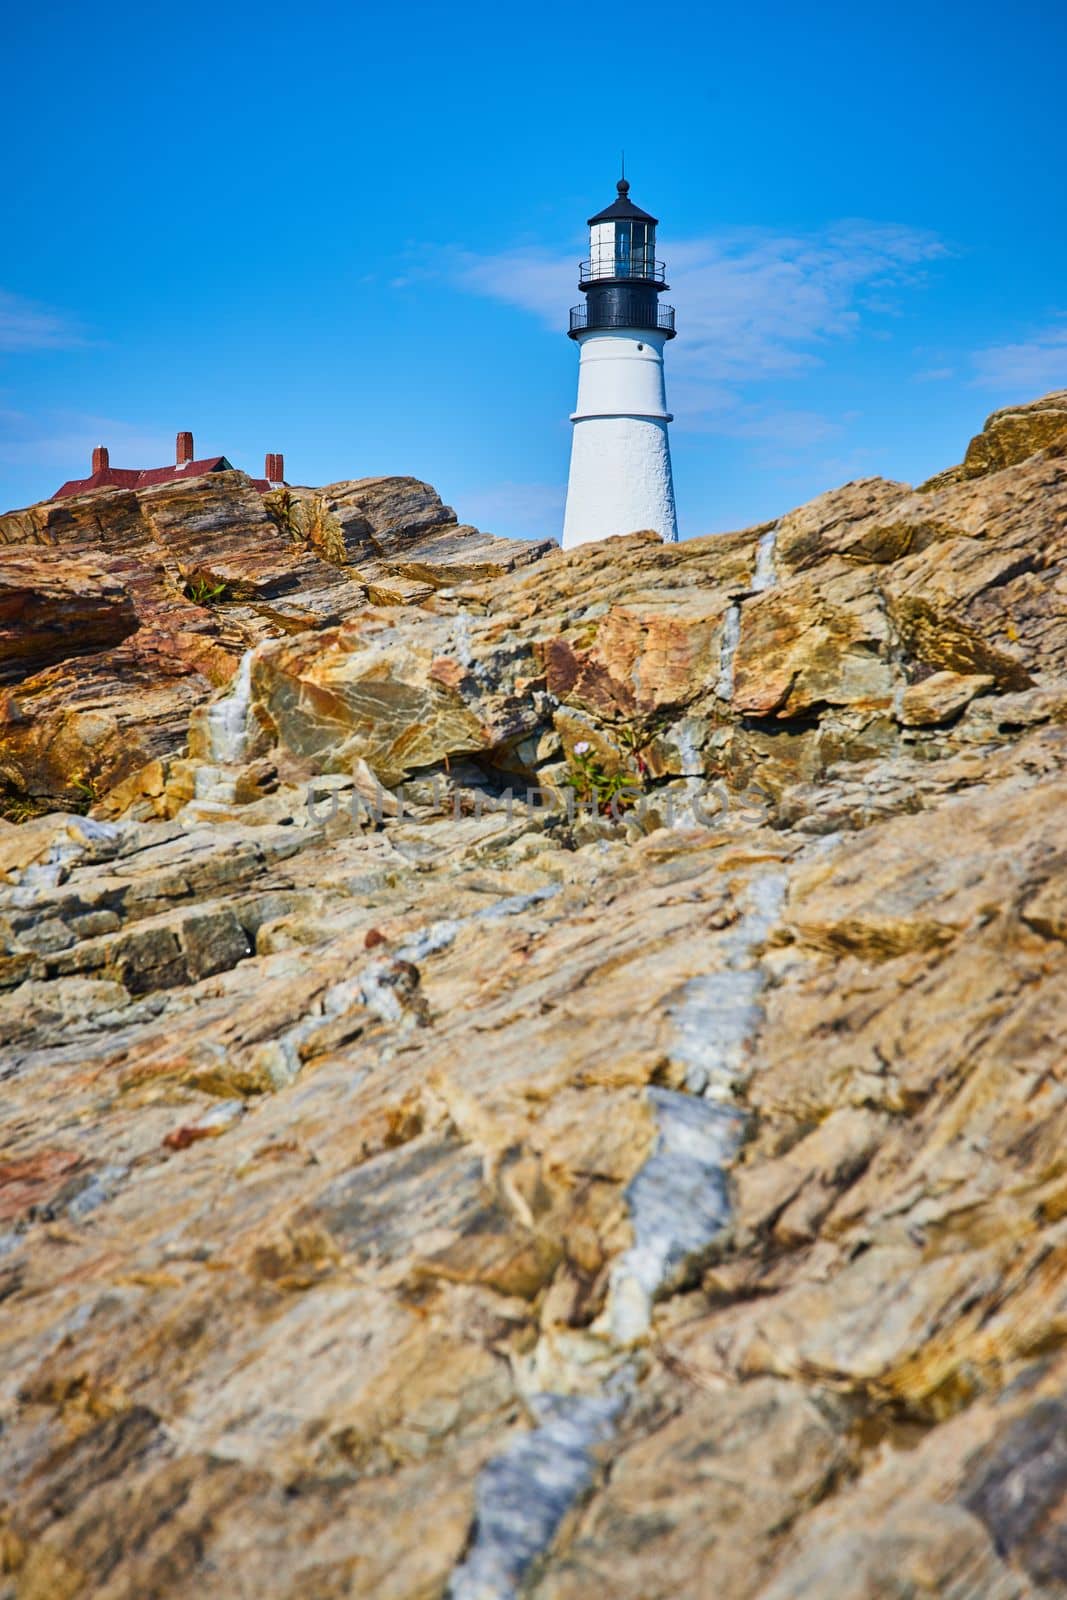 Small mineral quartz vein in rocks leading to white lighthouse by njproductions